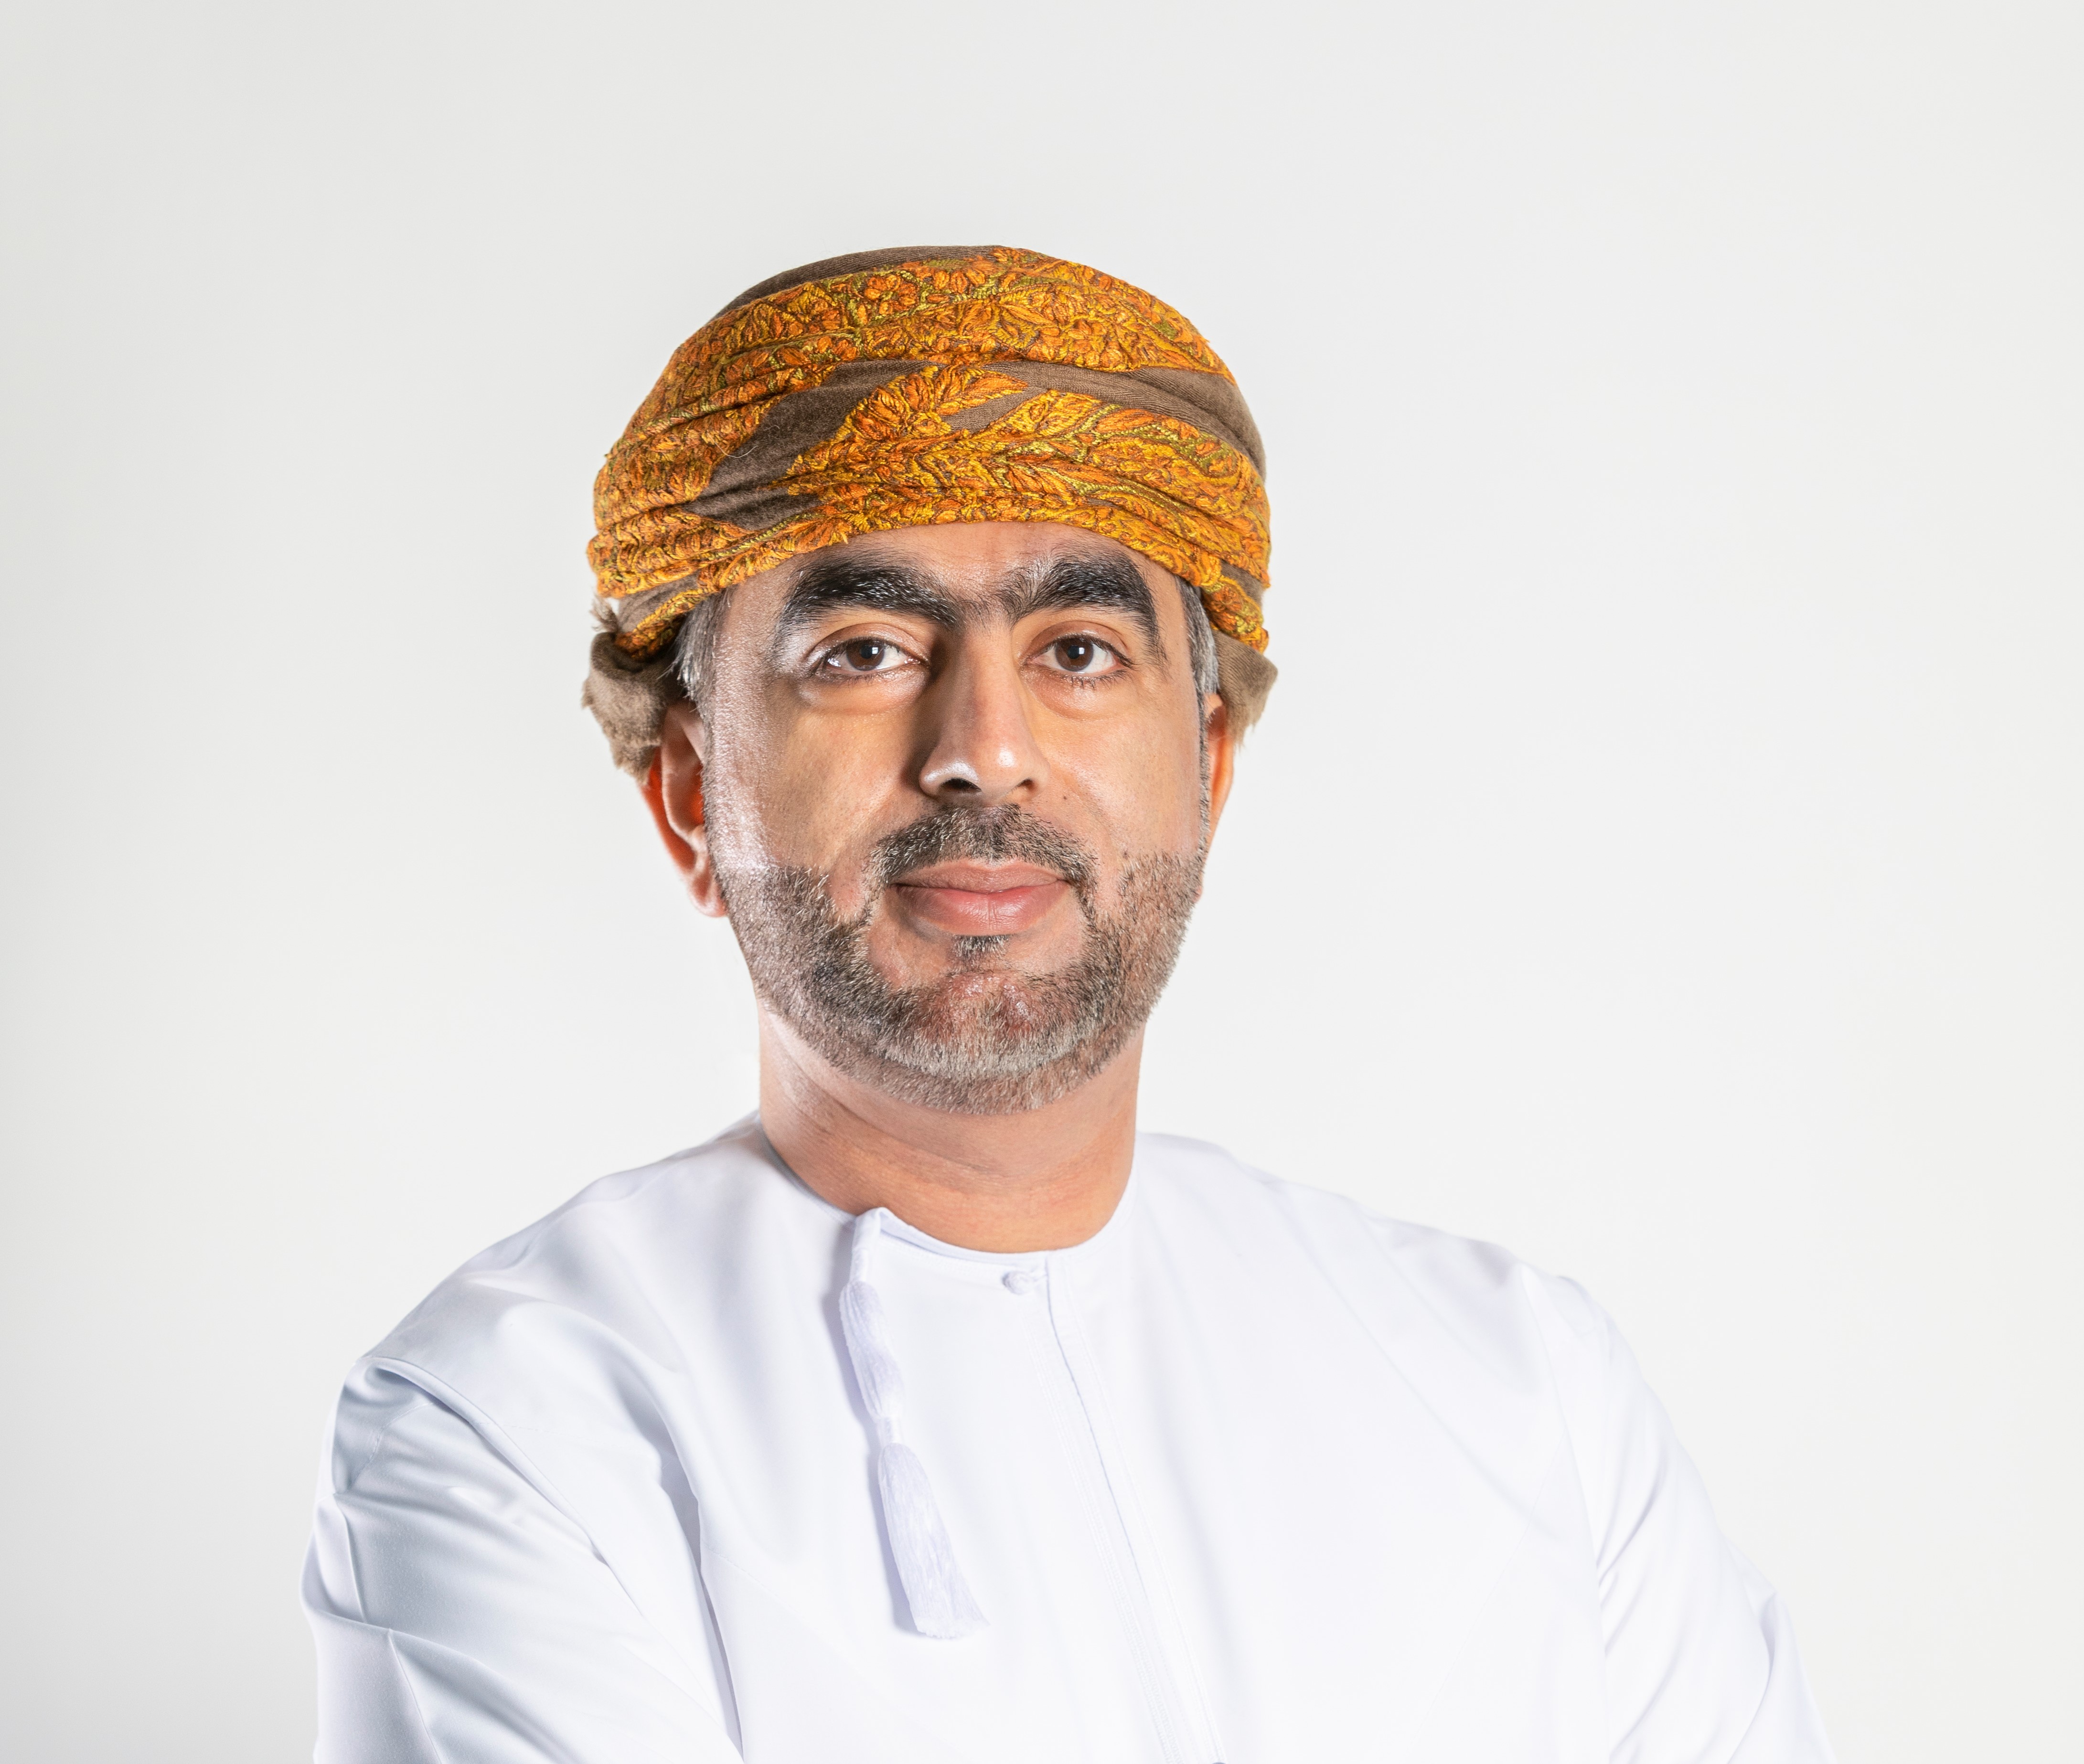 appointing-mr-khalid-al-balushi-as-ceo-of-the-oman-national-investments-development-company-tanmia